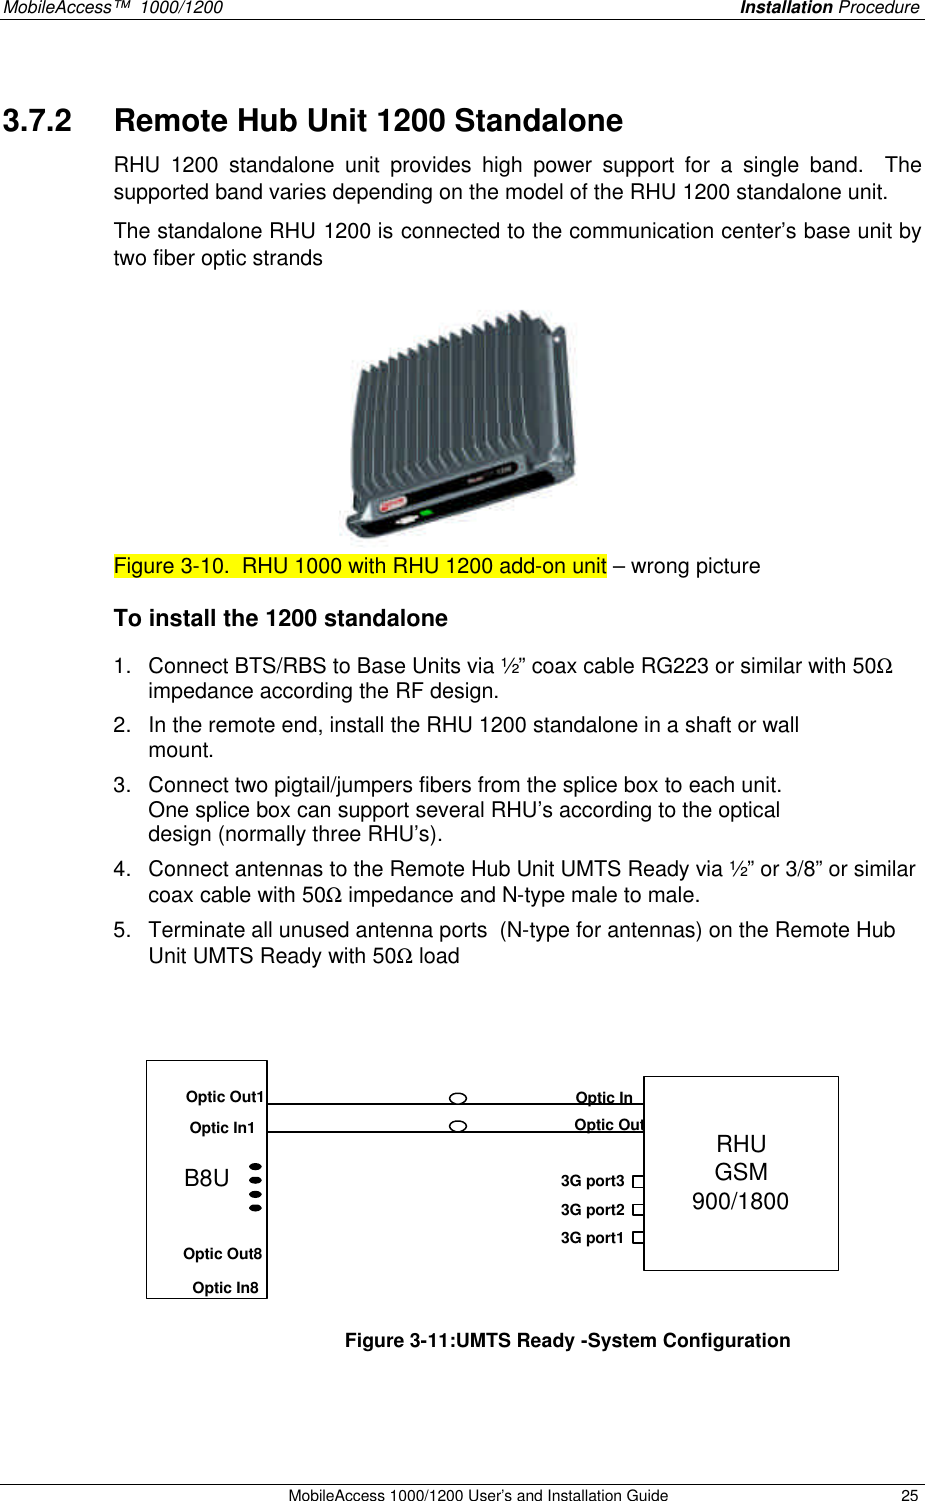 MobileAccess™  1000/1200    Installation Procedure  MobileAccess 1000/1200 User’s and Installation Guide 25 3.7.2  Remote Hub Unit 1200 Standalone  RHU 1200 standalone unit provides high power support for a single band.  The supported band varies depending on the model of the RHU 1200 standalone unit.   The standalone RHU 1200 is connected to the communication center’s base unit by two fiber optic strands   Figure 3-10.  RHU 1000 with RHU 1200 add-on unit – wrong picture To install the 1200 standalone 1. Connect BTS/RBS to Base Units via ½” coax cable RG223 or similar with 50Ω impedance according the RF design. 2. In the remote end, install the RHU 1200 standalone in a shaft or wall mount.  3. Connect two pigtail/jumpers fibers from the splice box to each unit. One splice box can support several RHU’s according to the optical design (normally three RHU’s).   4. Connect antennas to the Remote Hub Unit UMTS Ready via ½” or 3/8” or similar coax cable with 50Ω impedance and N-type male to male.  5. Terminate all unused antenna ports  (N-type for antennas) on the Remote Hub Unit UMTS Ready with 50Ω load     B8URHUGSM900/1800Optic InOptic Out3G port33G port23G port1Optic In1Optic Out1Optic In8Optic Out8  Figure 3-11:UMTS Ready -System Configuration    